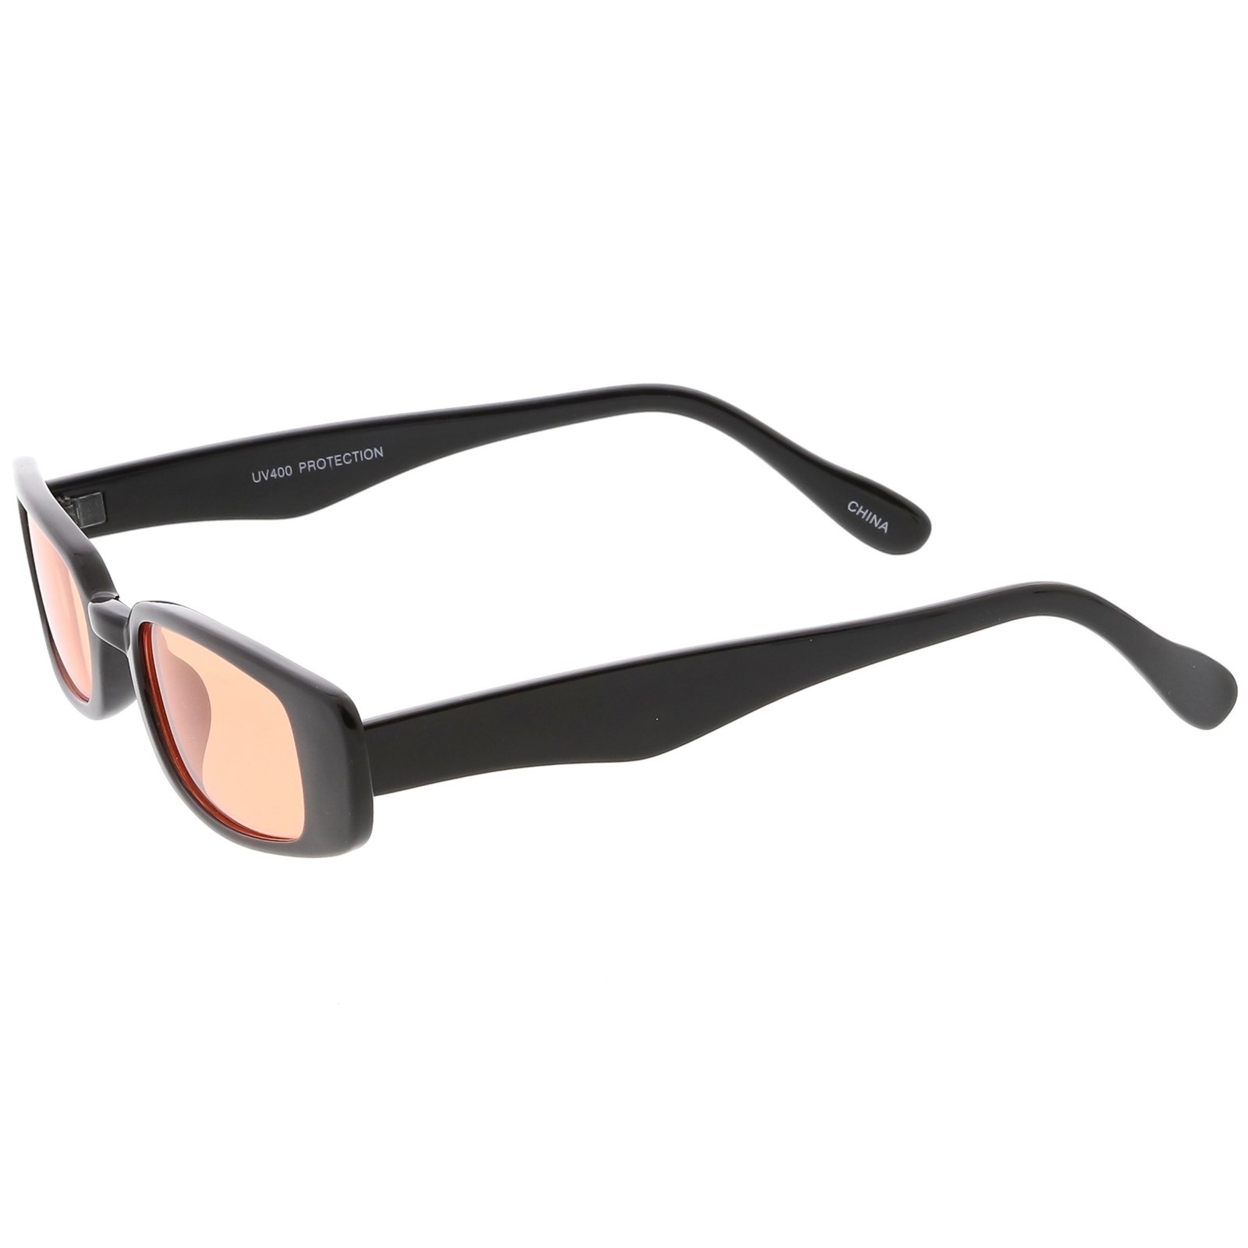 Extreme Thin Small Lens Rectangle Sunglasses Color Tinted 49mm - Black / Yellow